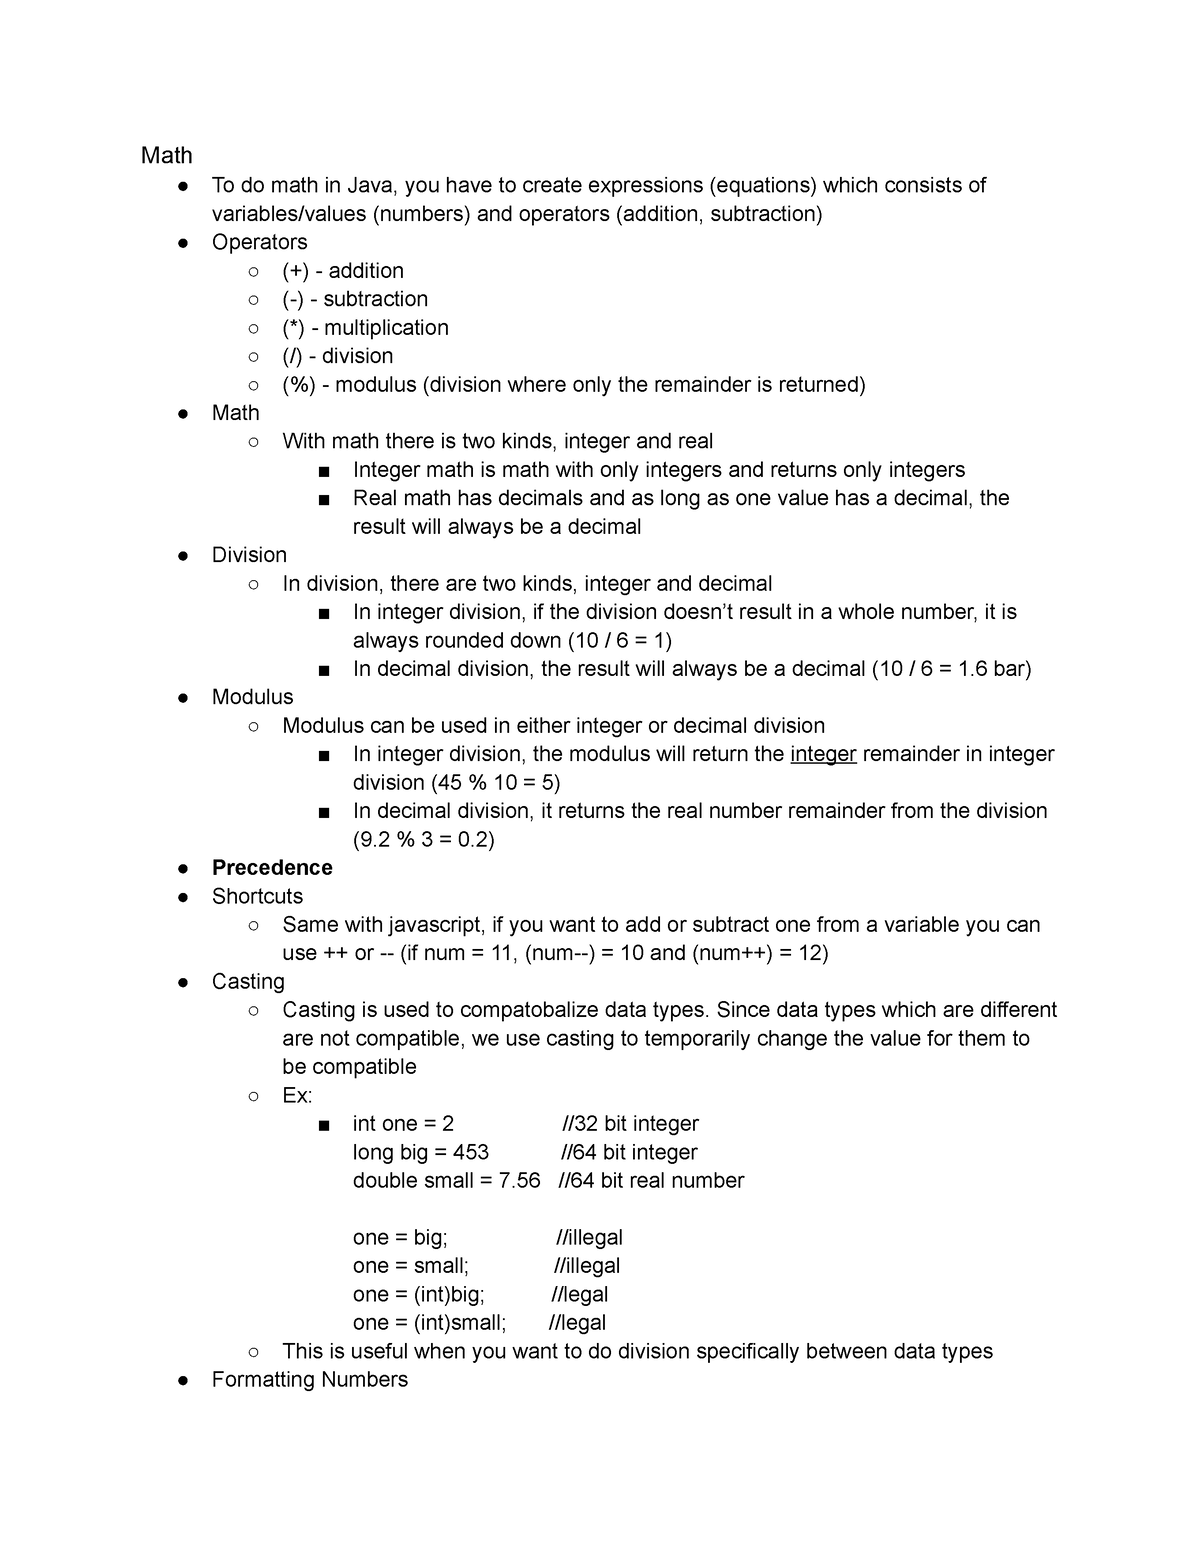 unit-02-notes-comp-sci-java-math-to-do-math-in-java-you-have-to